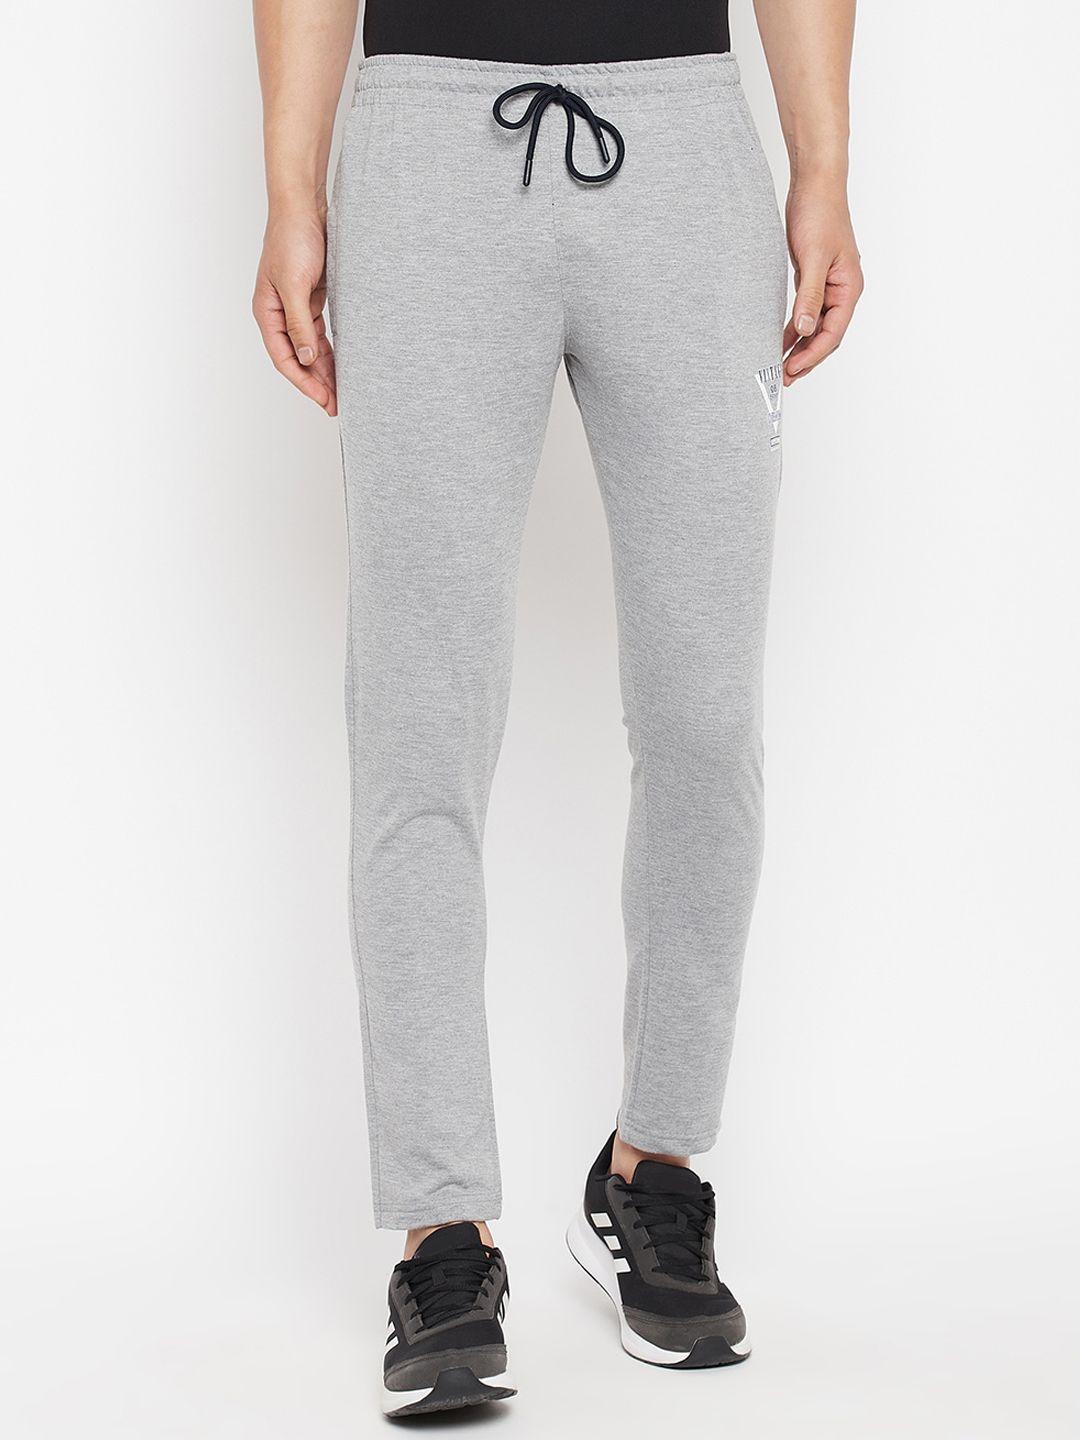 firstkrush men grey solid cotton track pants